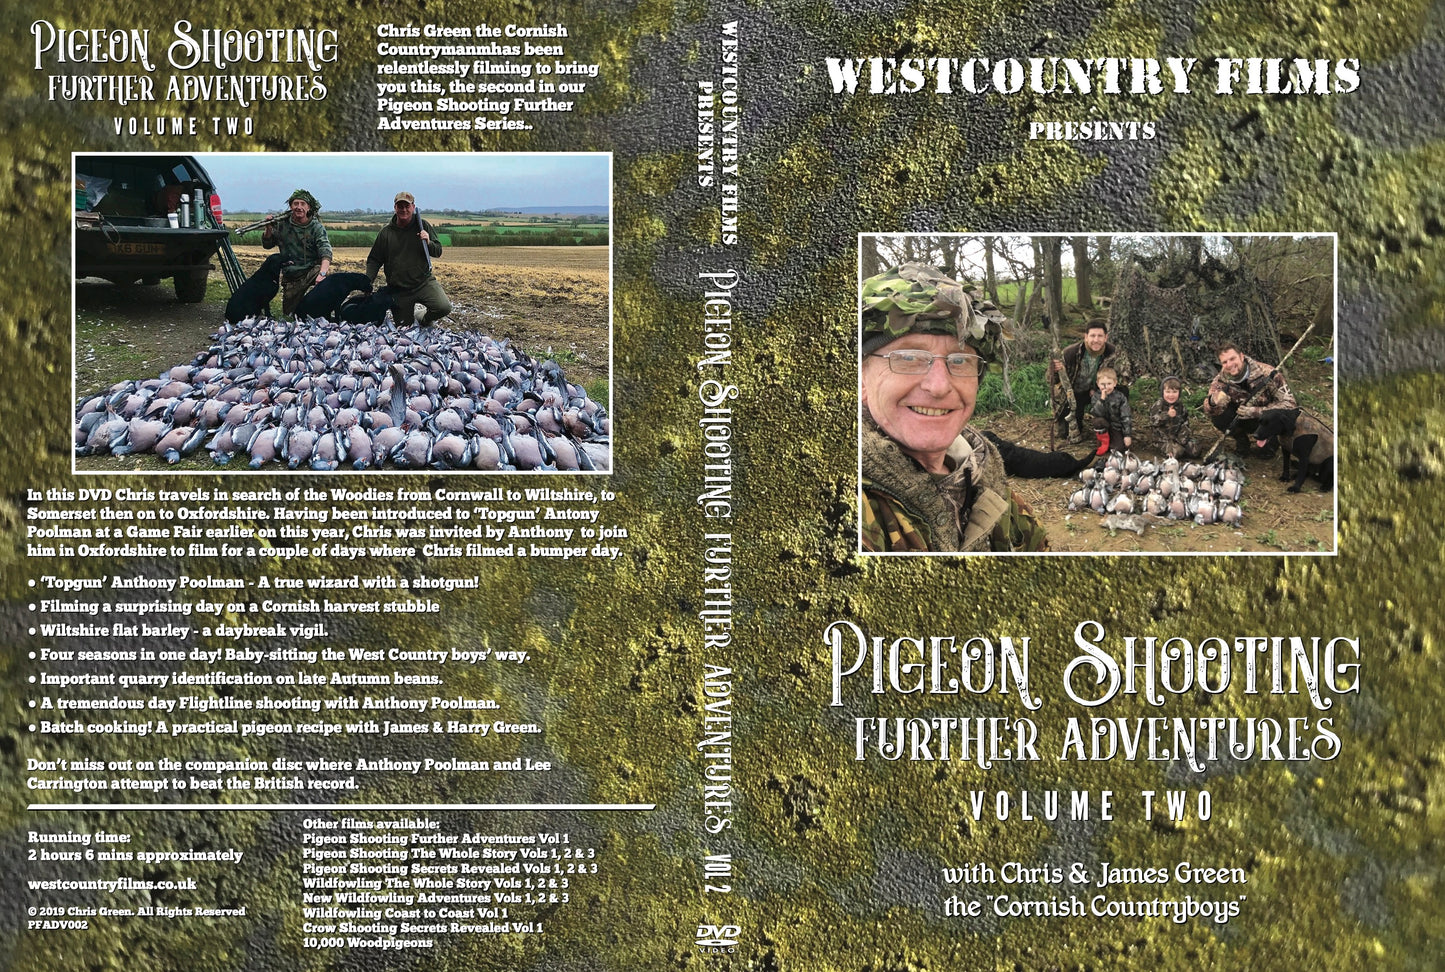 PIGEON SHOOTING FURTHER ADVENTURES – Volume Two